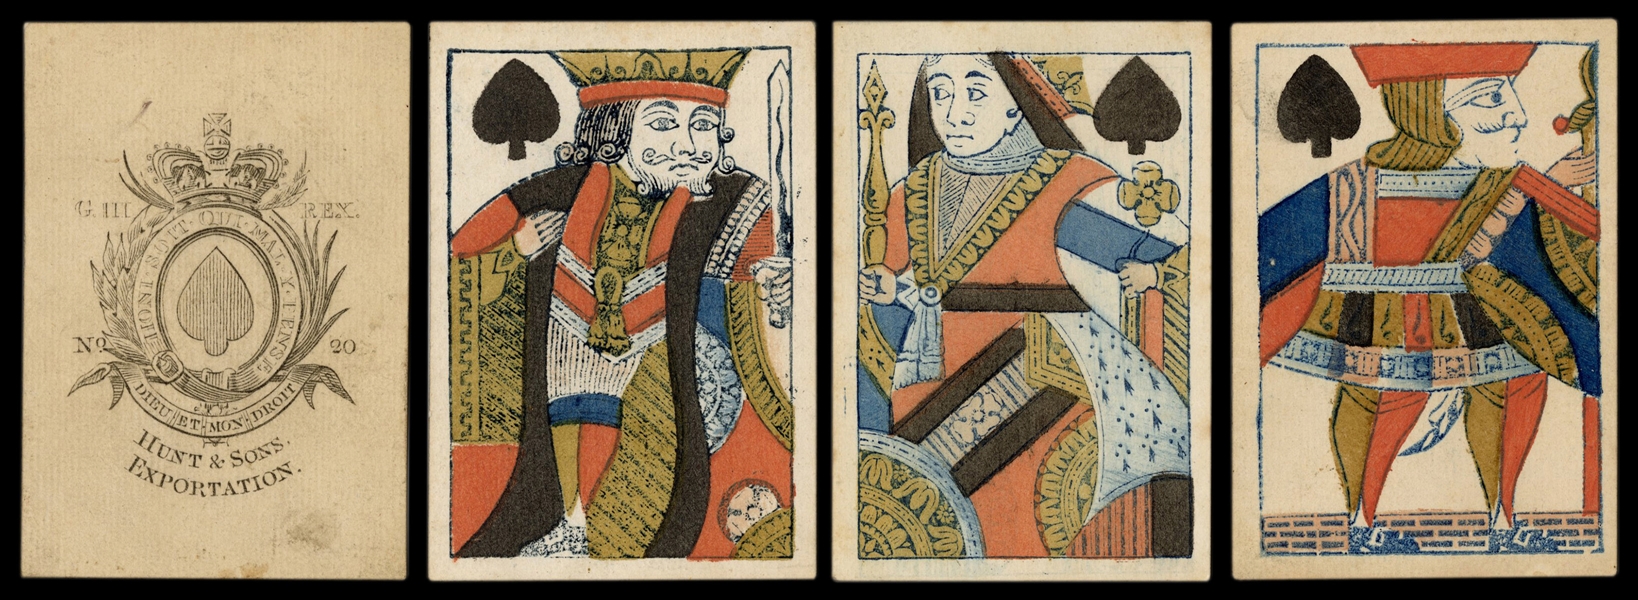  Hunt & Sons Exportation Playing Cards. English, ca. 1801. 5...